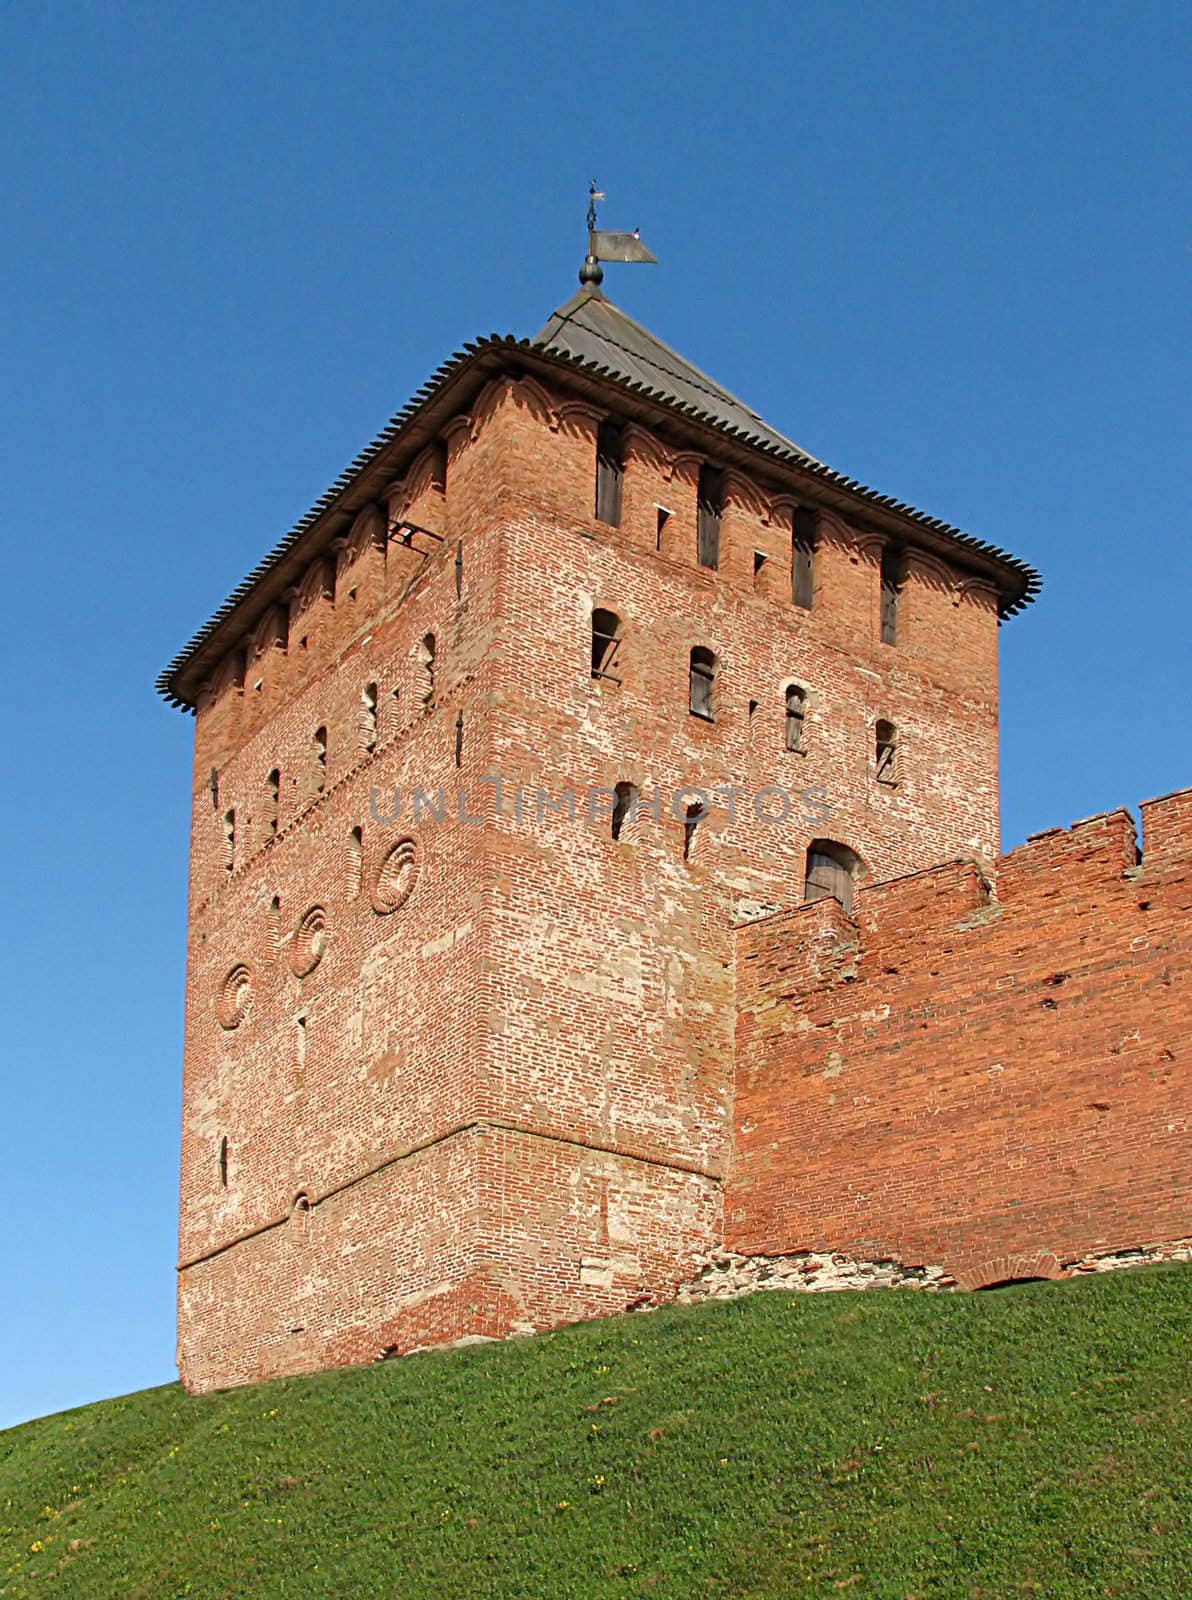 The walls and towers of the Novgorod citadel